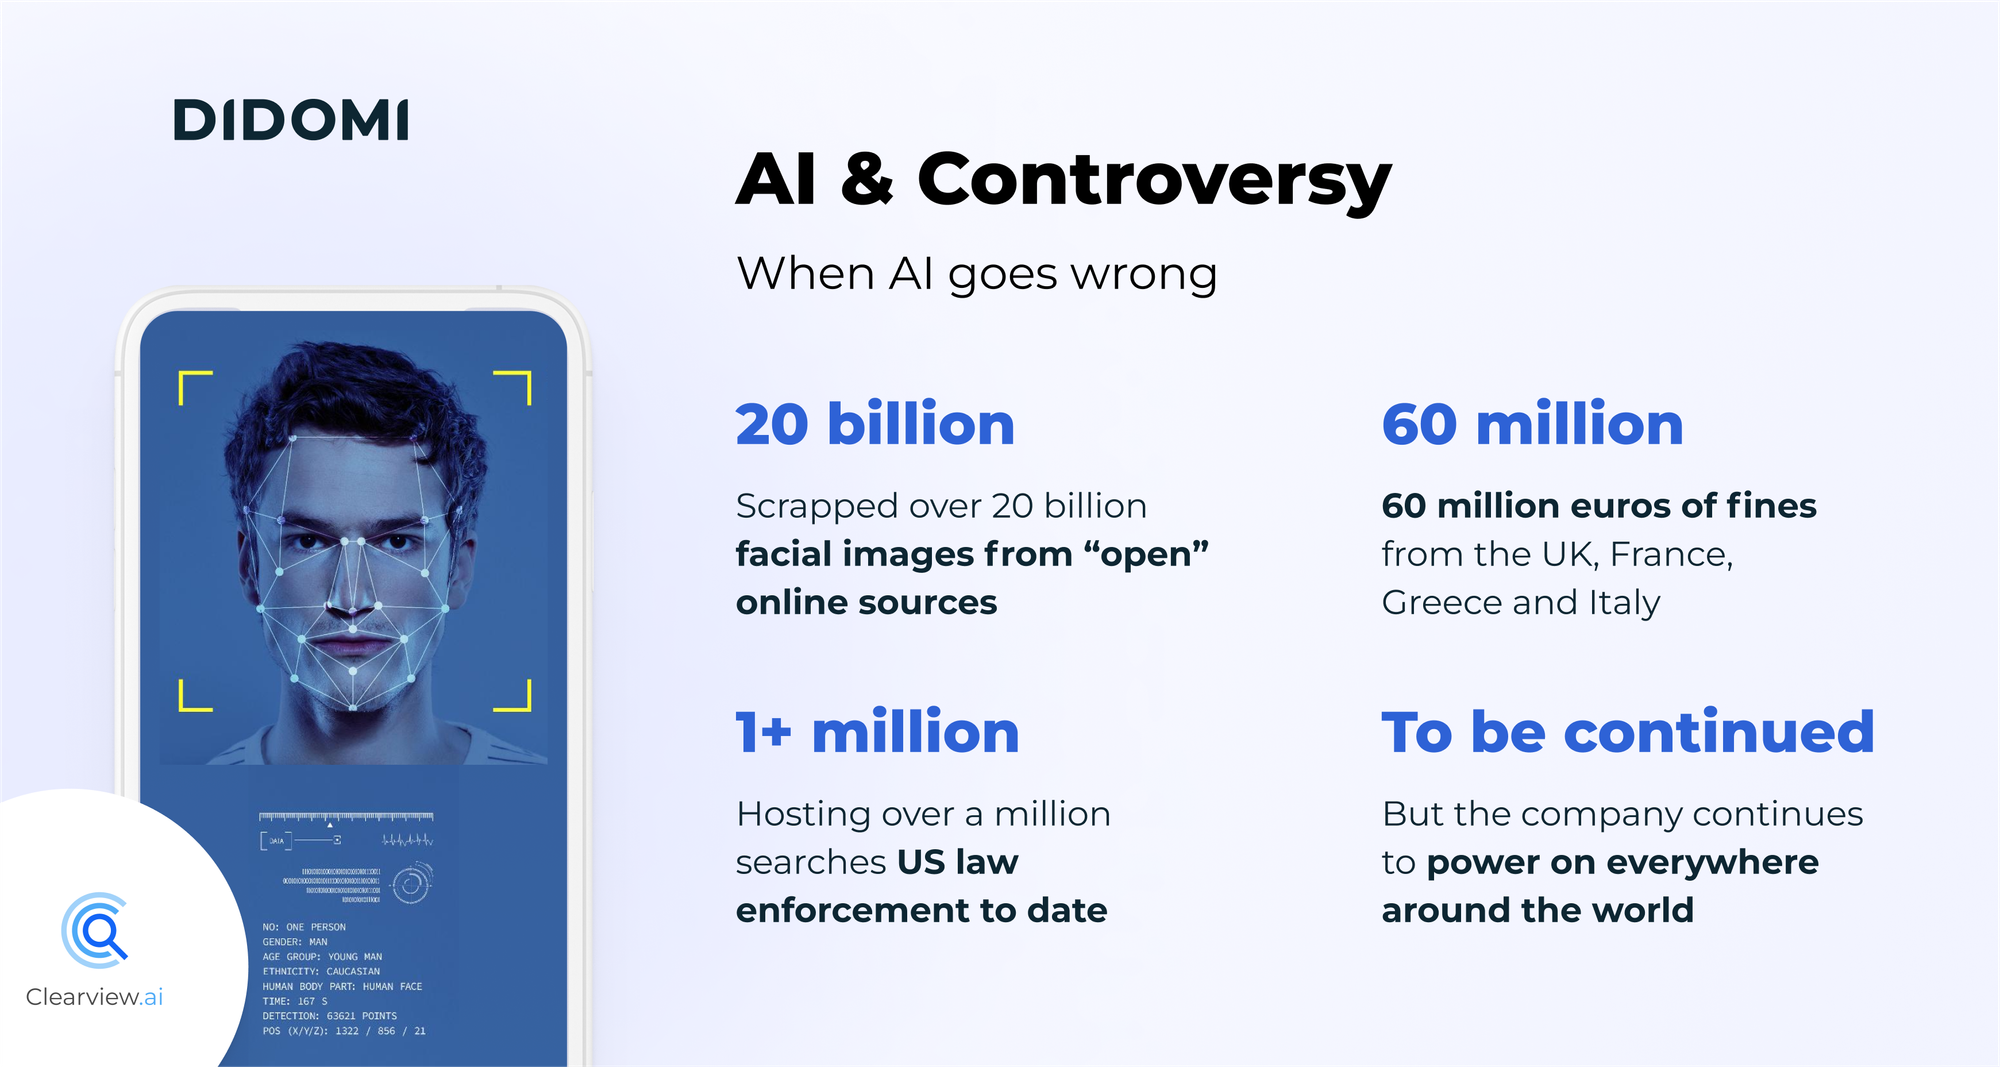 A visual title AI and controversy and subtitled "When AI goes wrong" listing the Clearview AI story